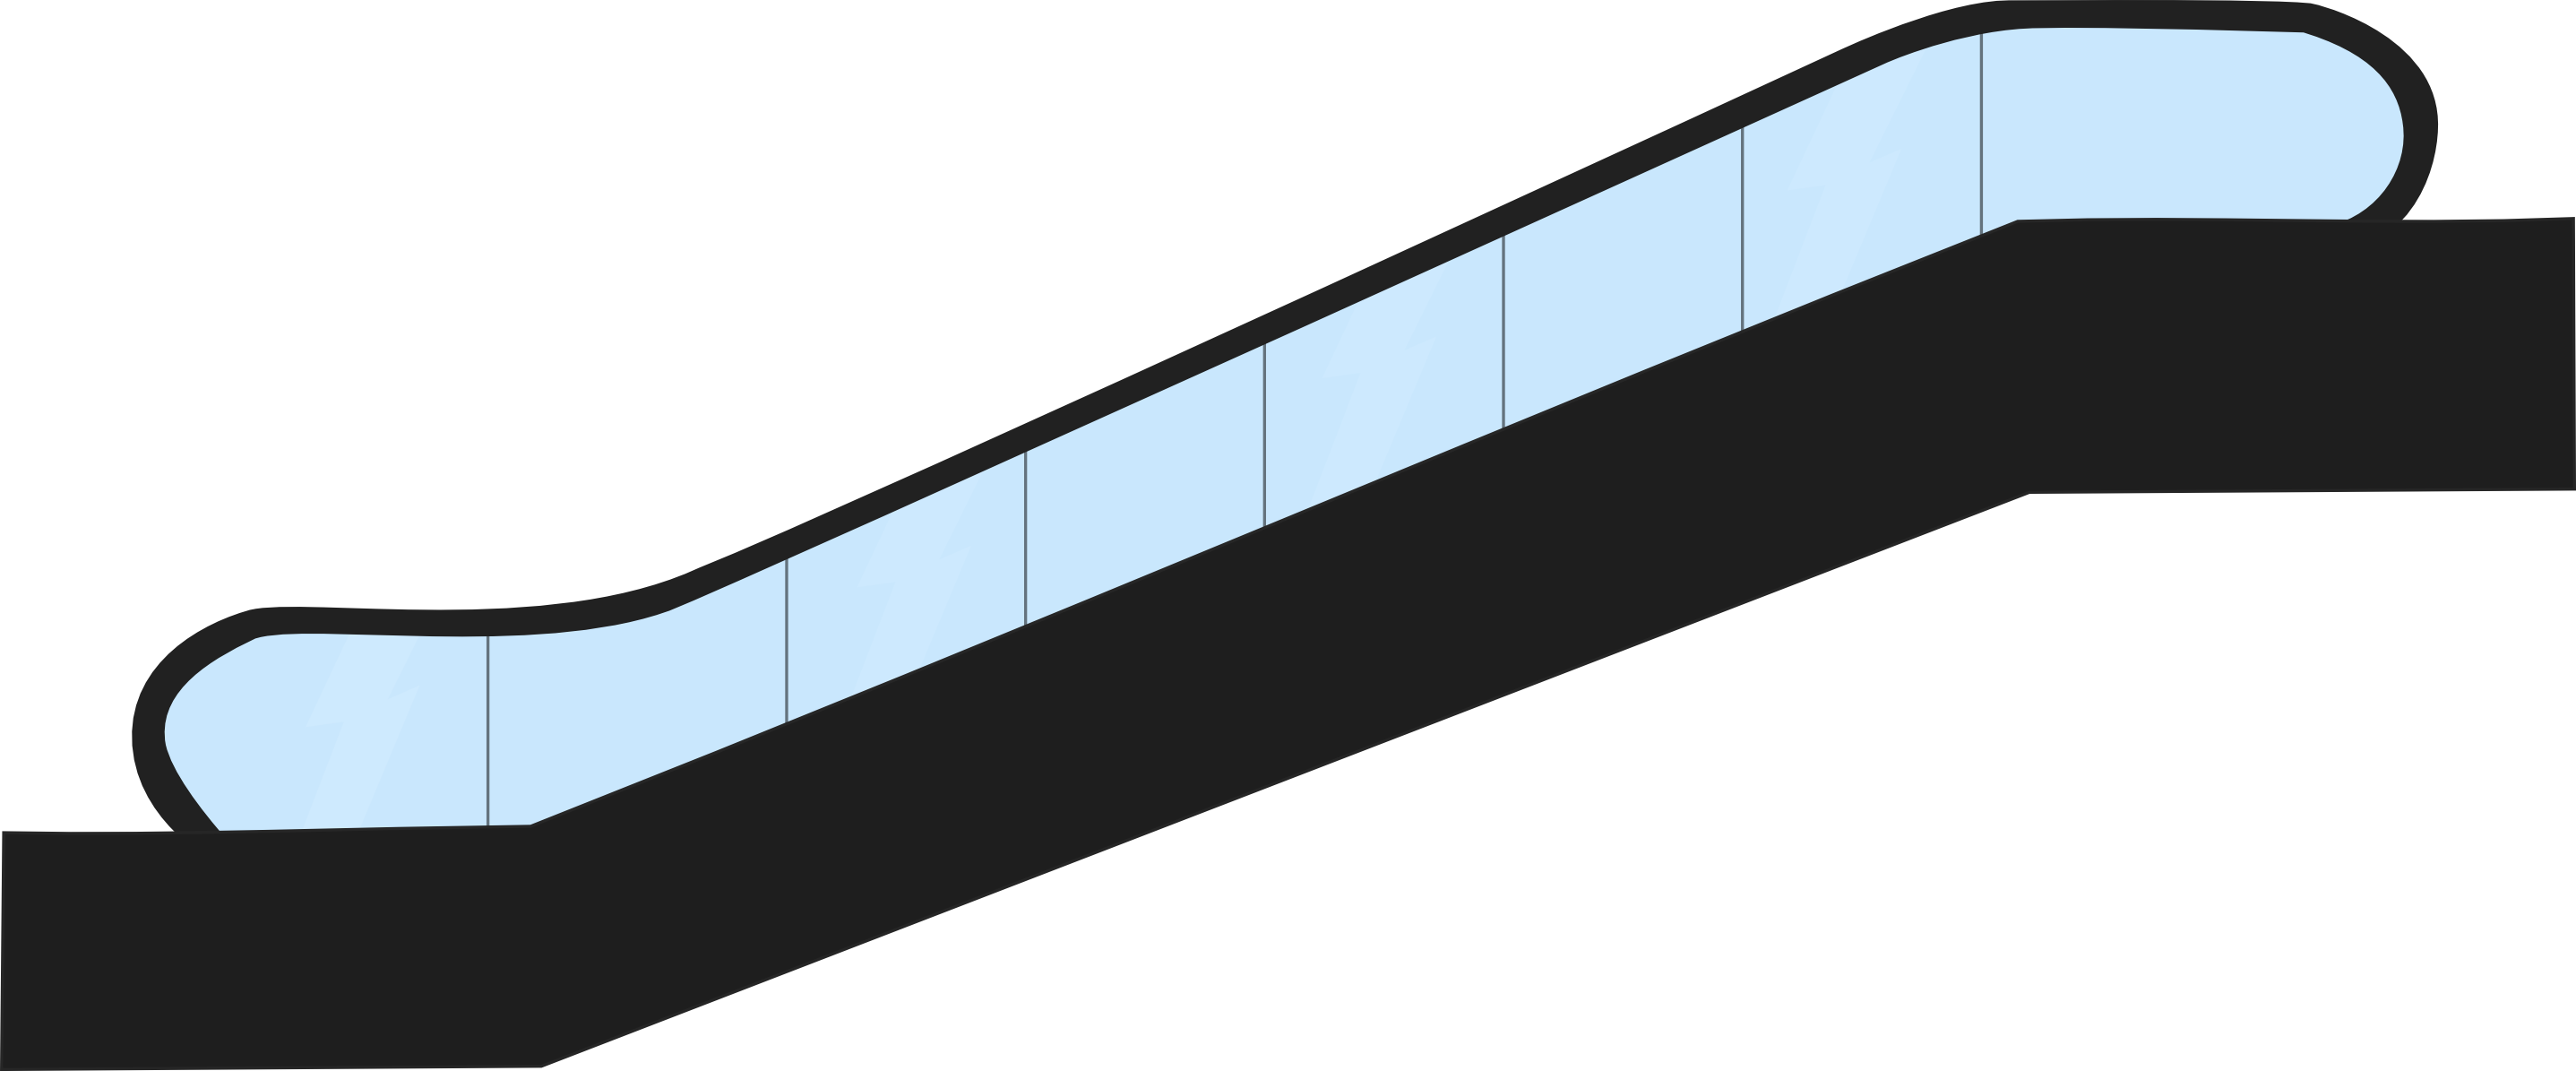 A Black Rectangular Object With Windows